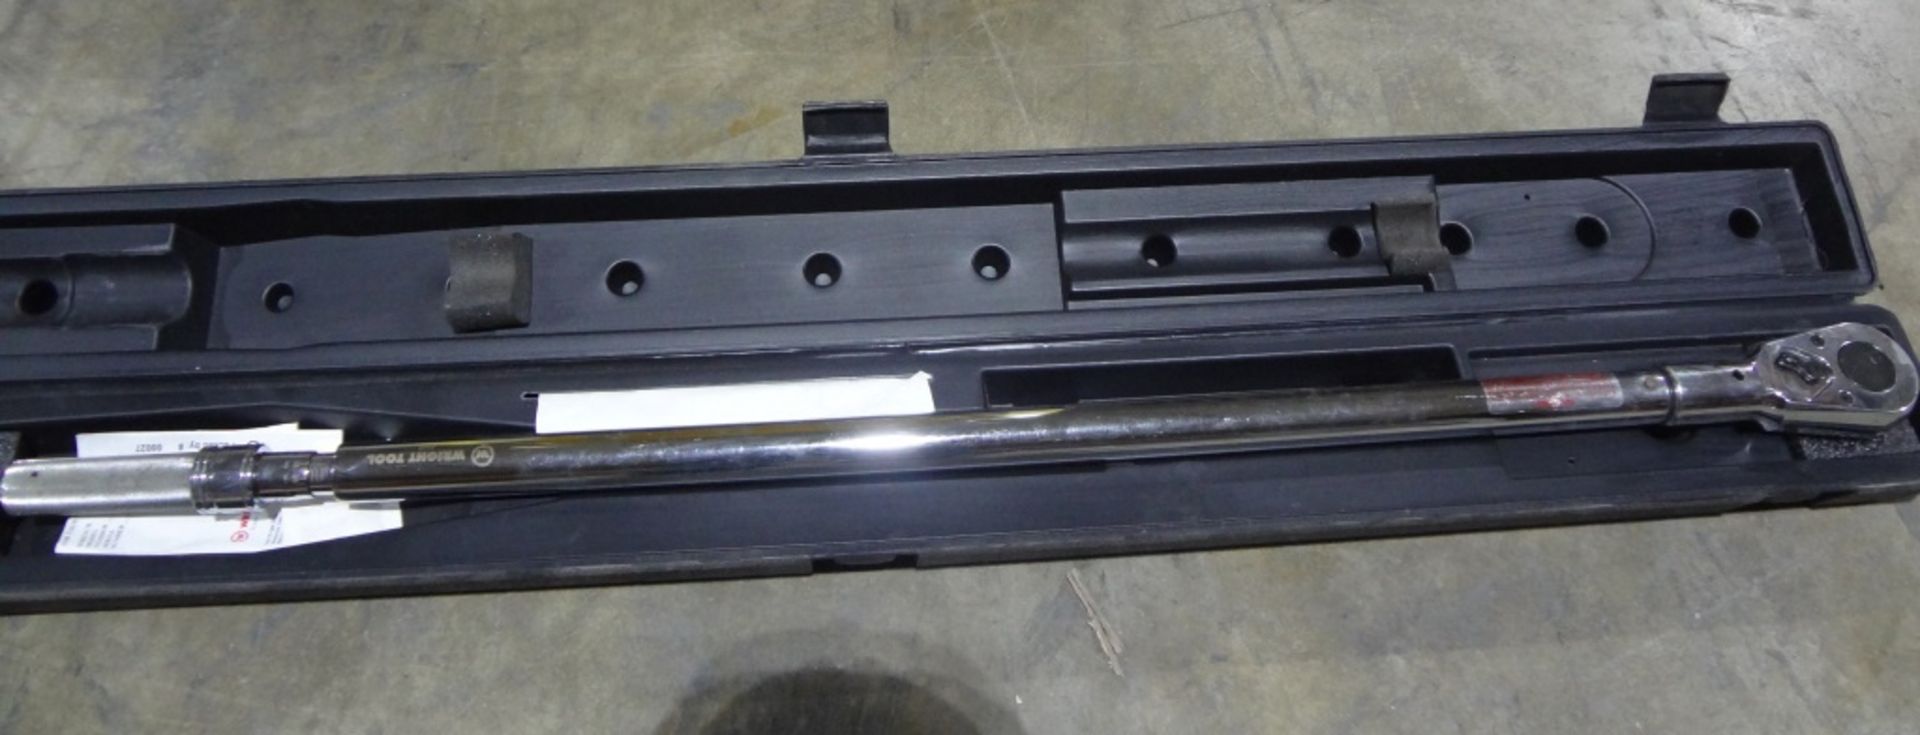 40" Torque Wrench - Image 2 of 8